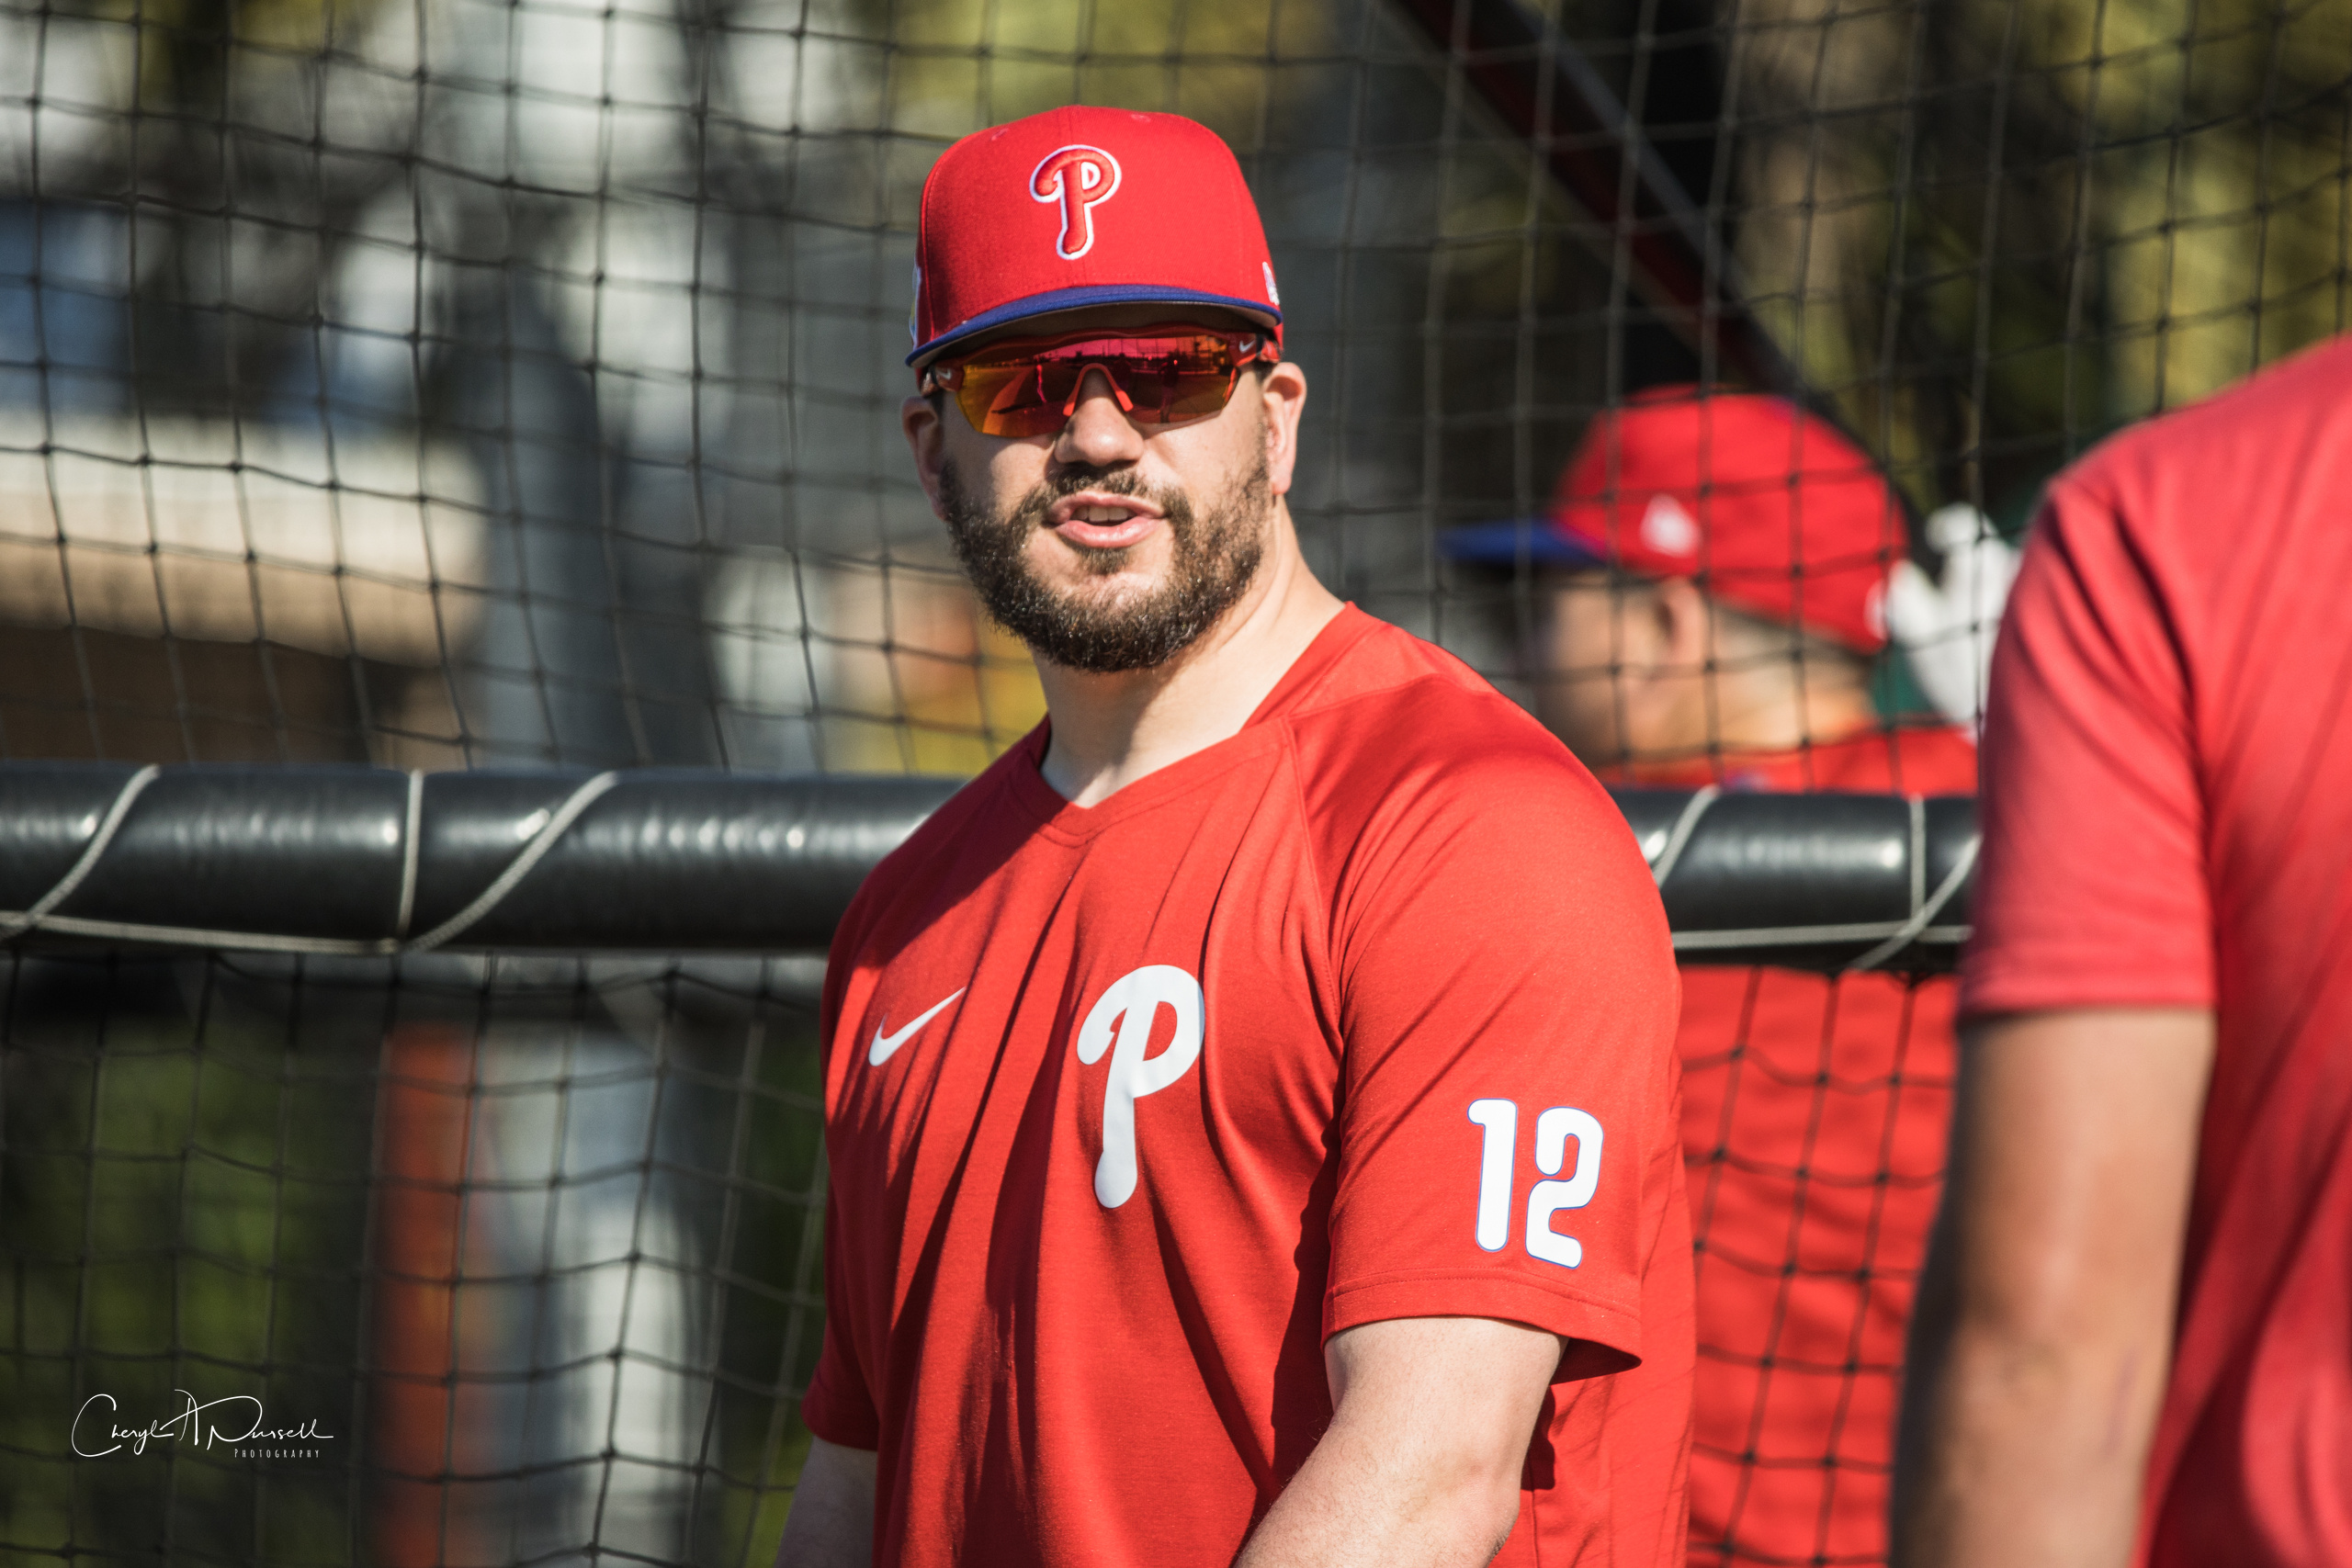 Kyle Schwarber says he'll consider participating in Home Run Derby   Phillies Nation - Your source for Philadelphia Phillies news, opinion,  history, rumors, events, and other fun stuff.